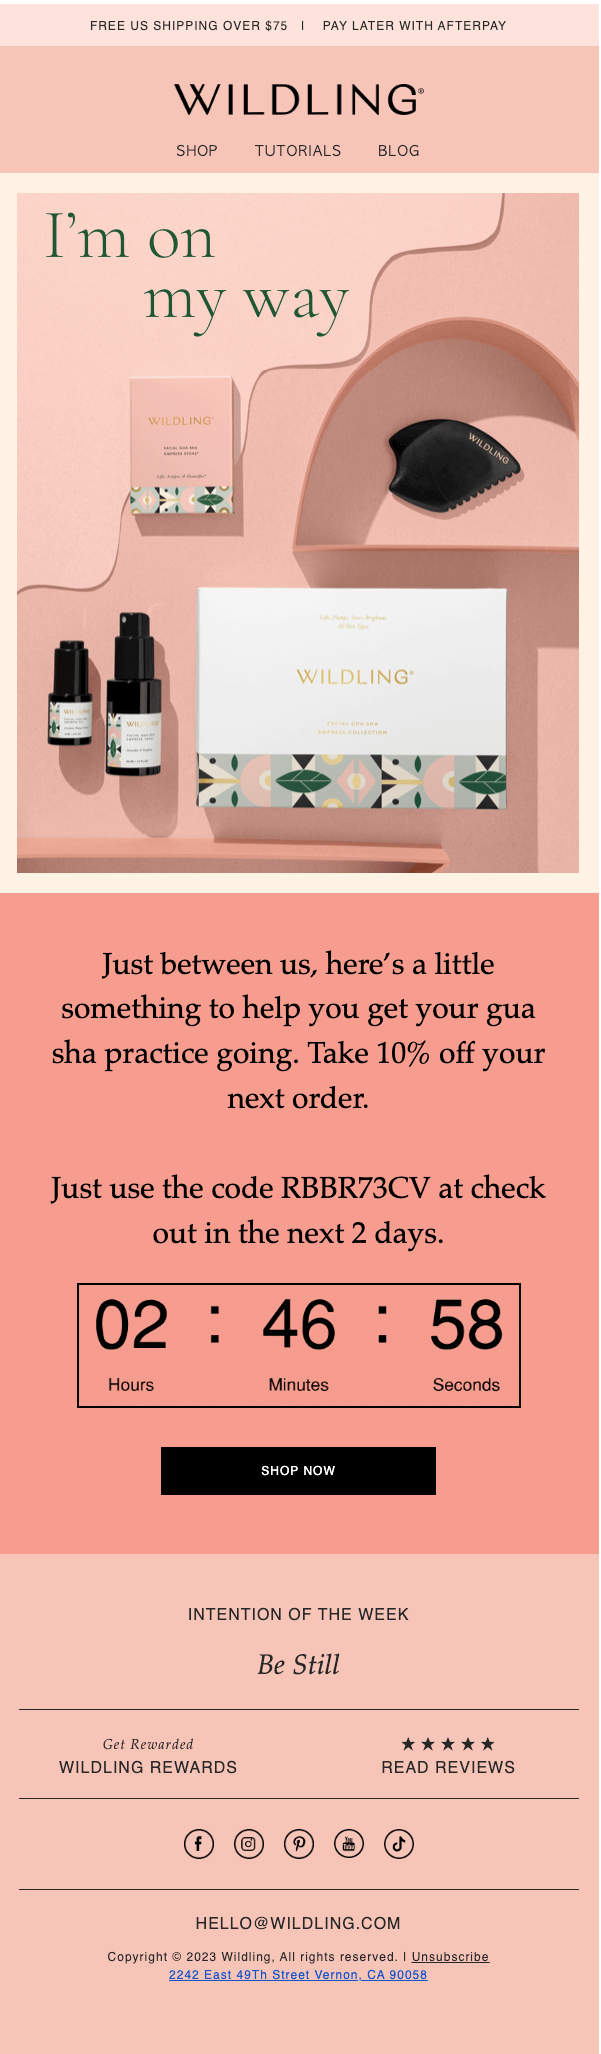 Image shows a promotional email from Wildling Beauty